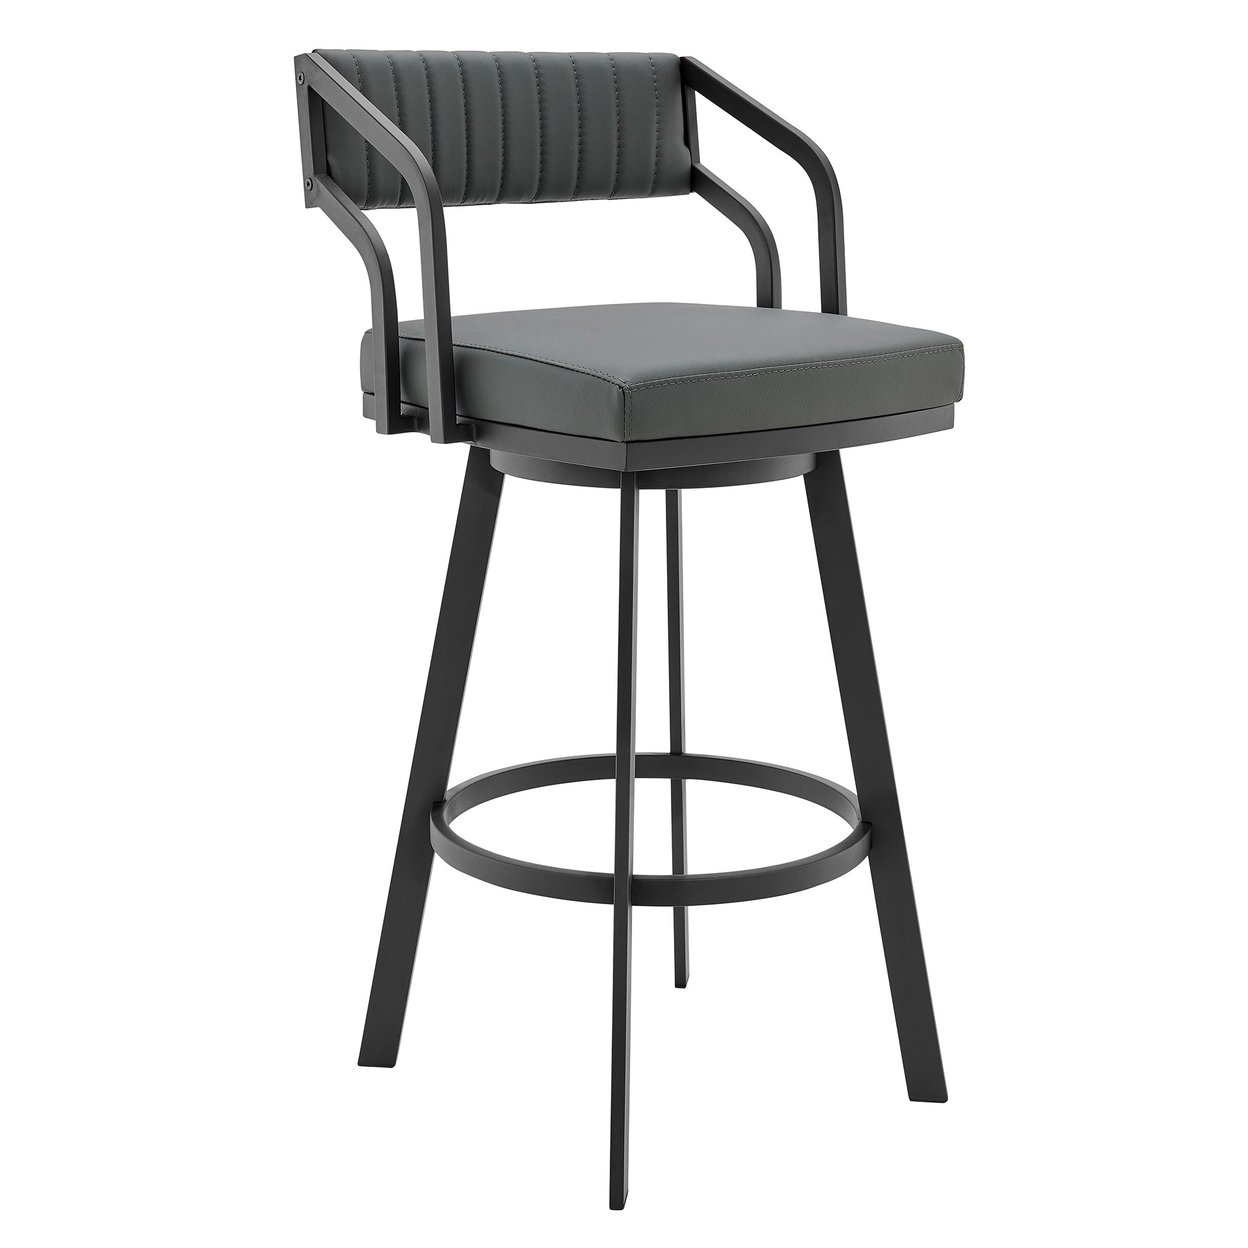 30 Inch Swivel Barstool Chair, Open Sloped Arms, Gray Faux Leather, Black- Saltoro Sherpi